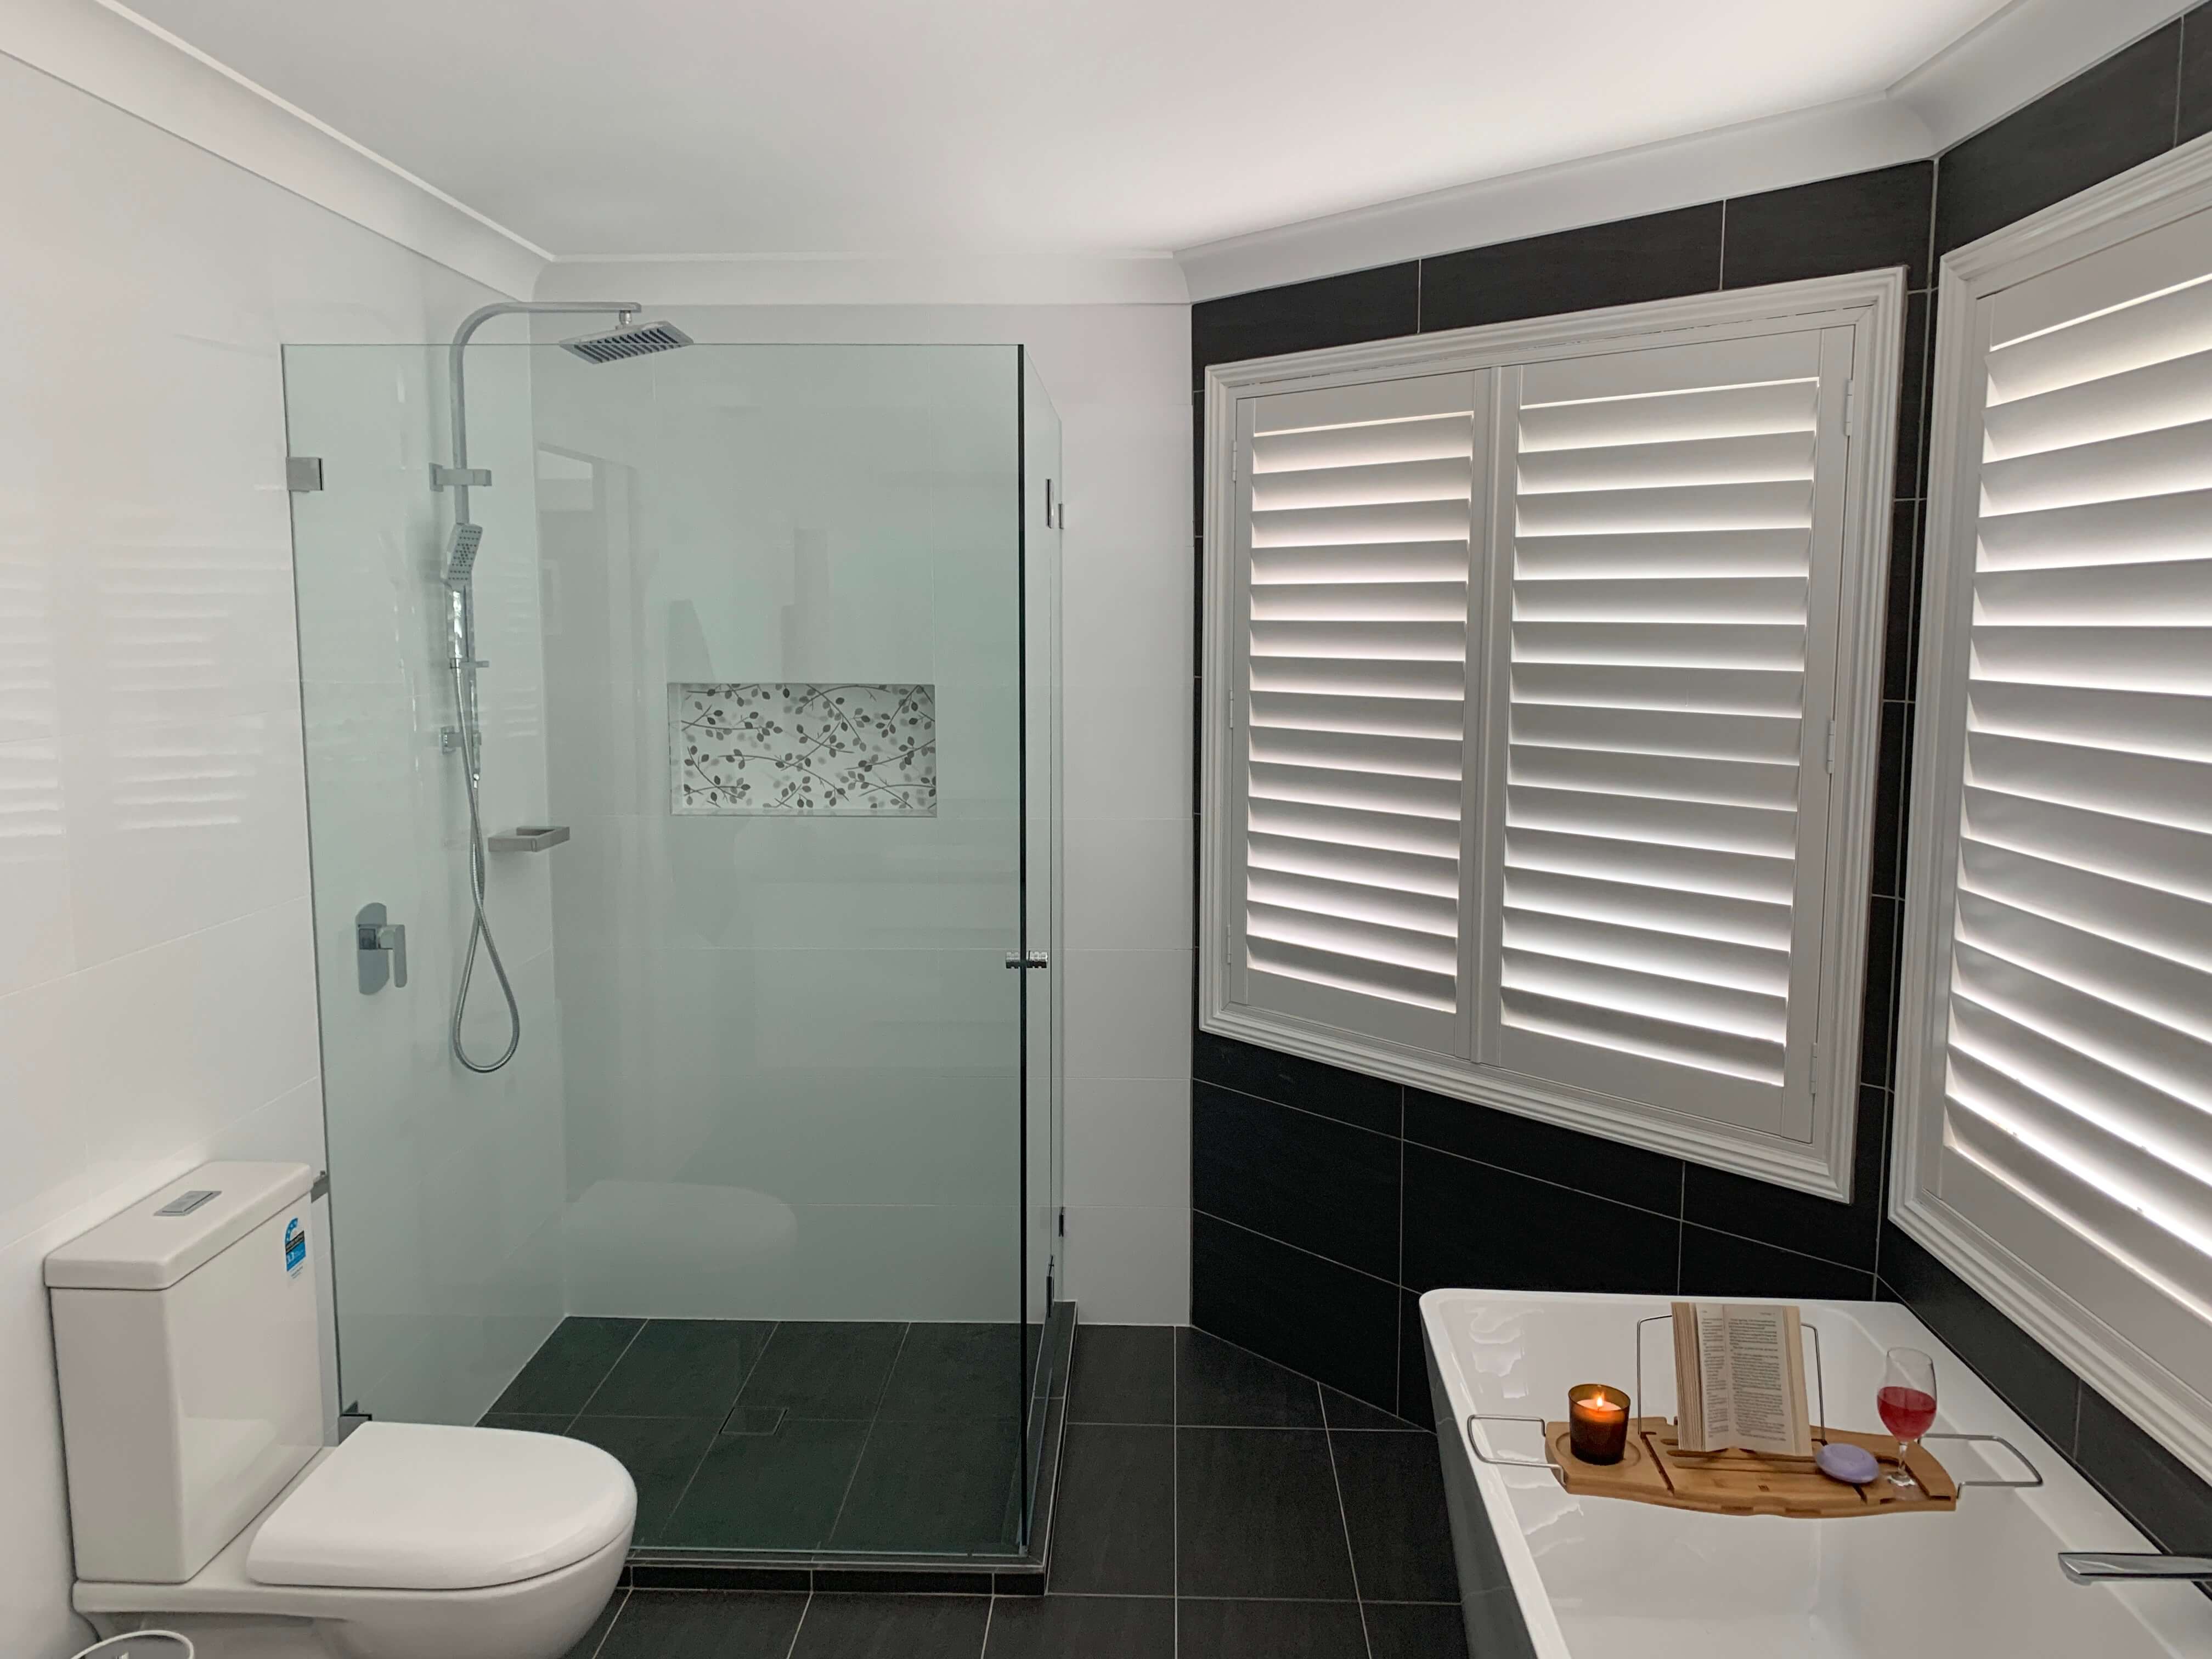 Beautiful shower recess with chrome rail shower, niche & frameless shower screen - bathroom renovation by Master Bathrooms & Kitchens.